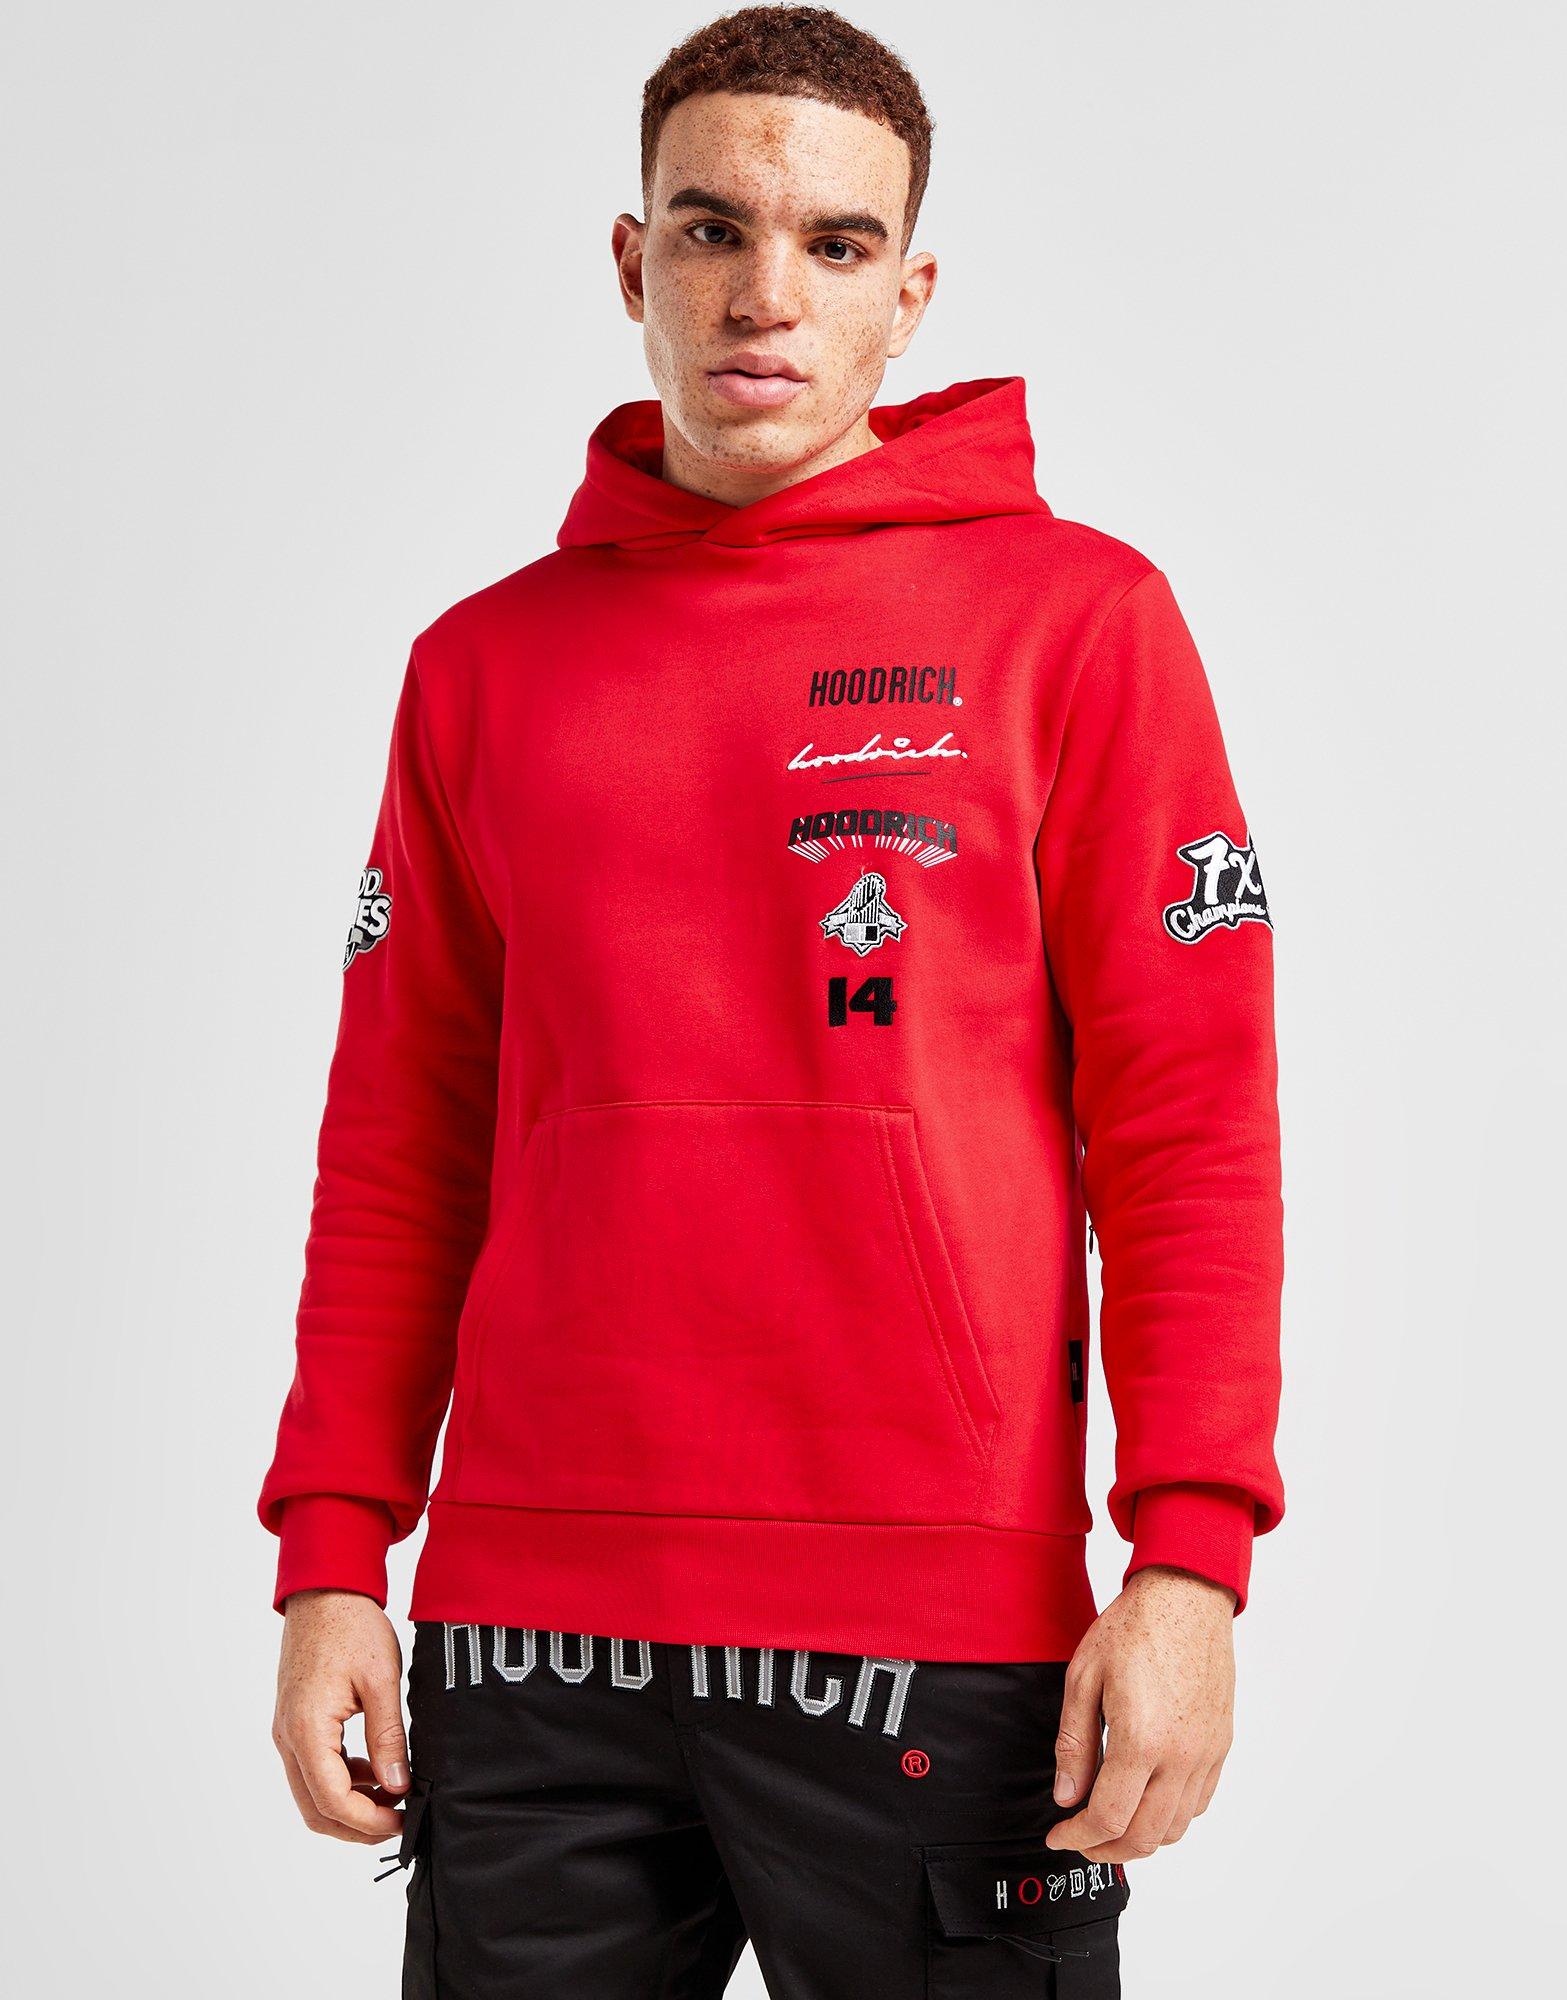 Lifeguard-Guard Hooded Sweatshirt With Logo - Red AQCT100-280-SWRD